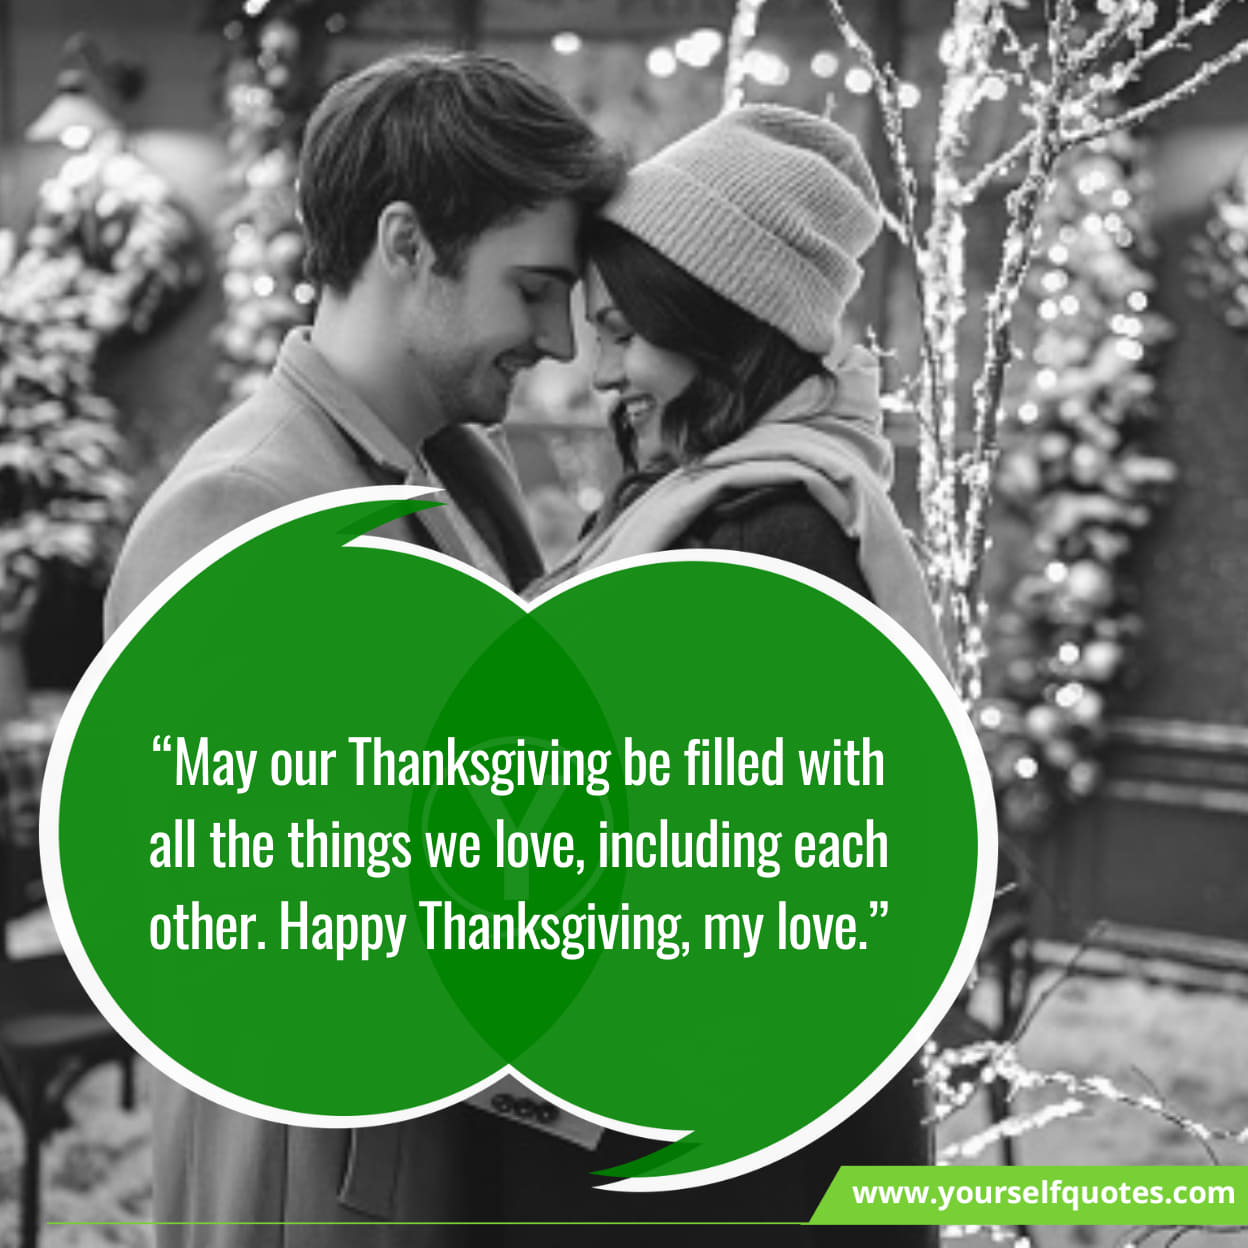 A Thanksgiving full of love and gratitude for us